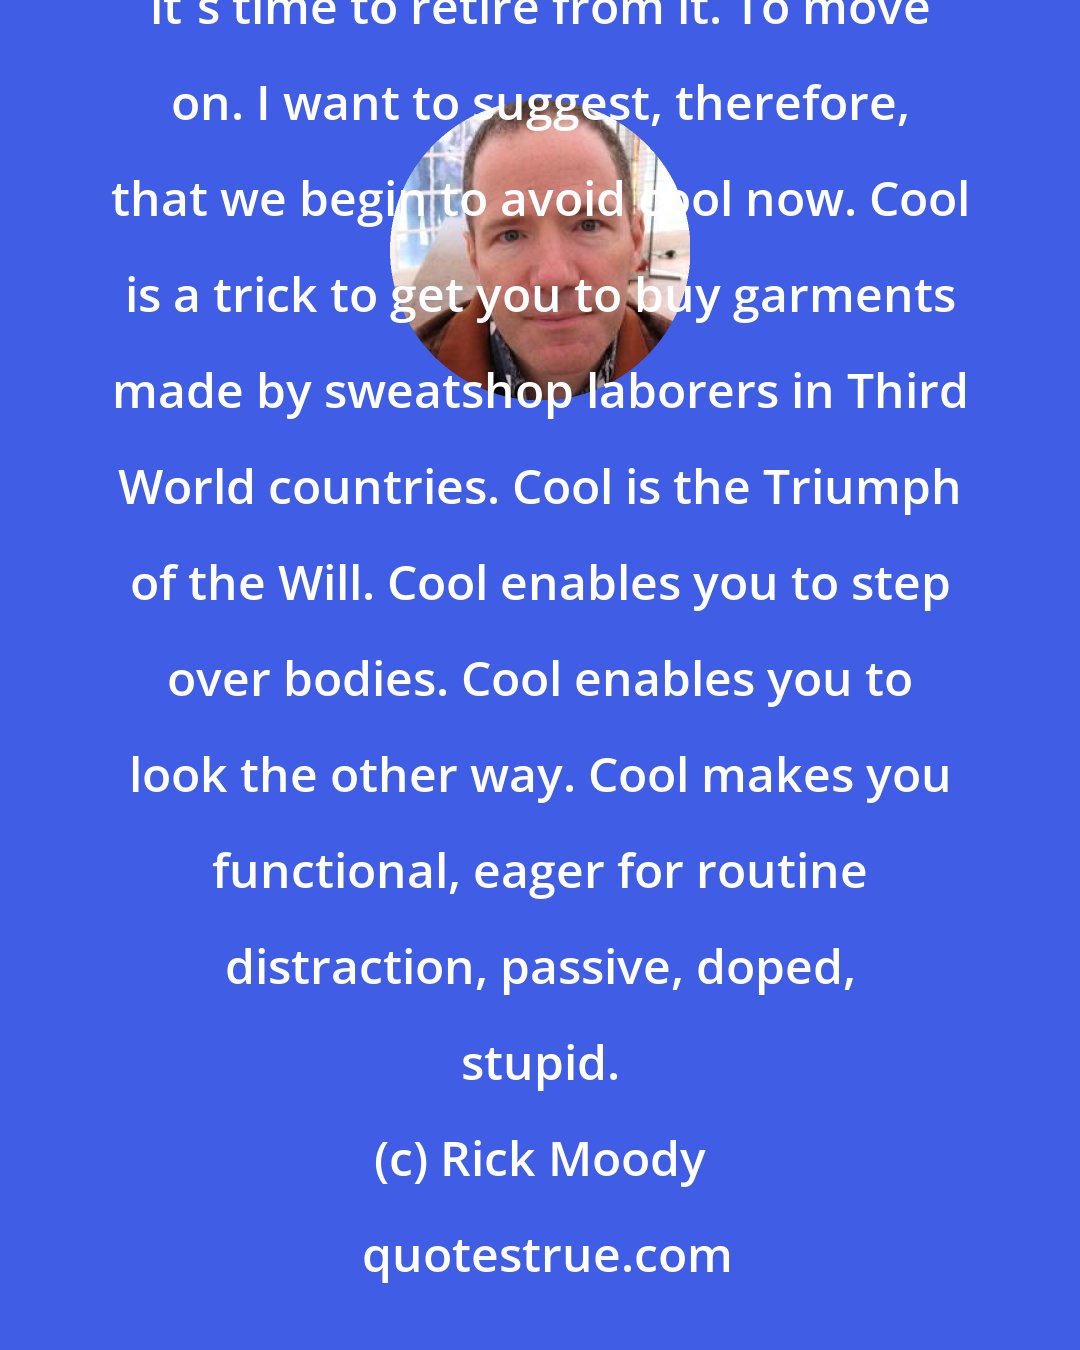 Rick Moody: Cool is spent. Cool is empty. Cool is ex post facto. When advertisers and pundits hoard a word, you know it's time to retire from it. To move on. I want to suggest, therefore, that we begin to avoid cool now. Cool is a trick to get you to buy garments made by sweatshop laborers in Third World countries. Cool is the Triumph of the Will. Cool enables you to step over bodies. Cool enables you to look the other way. Cool makes you functional, eager for routine distraction, passive, doped, stupid.